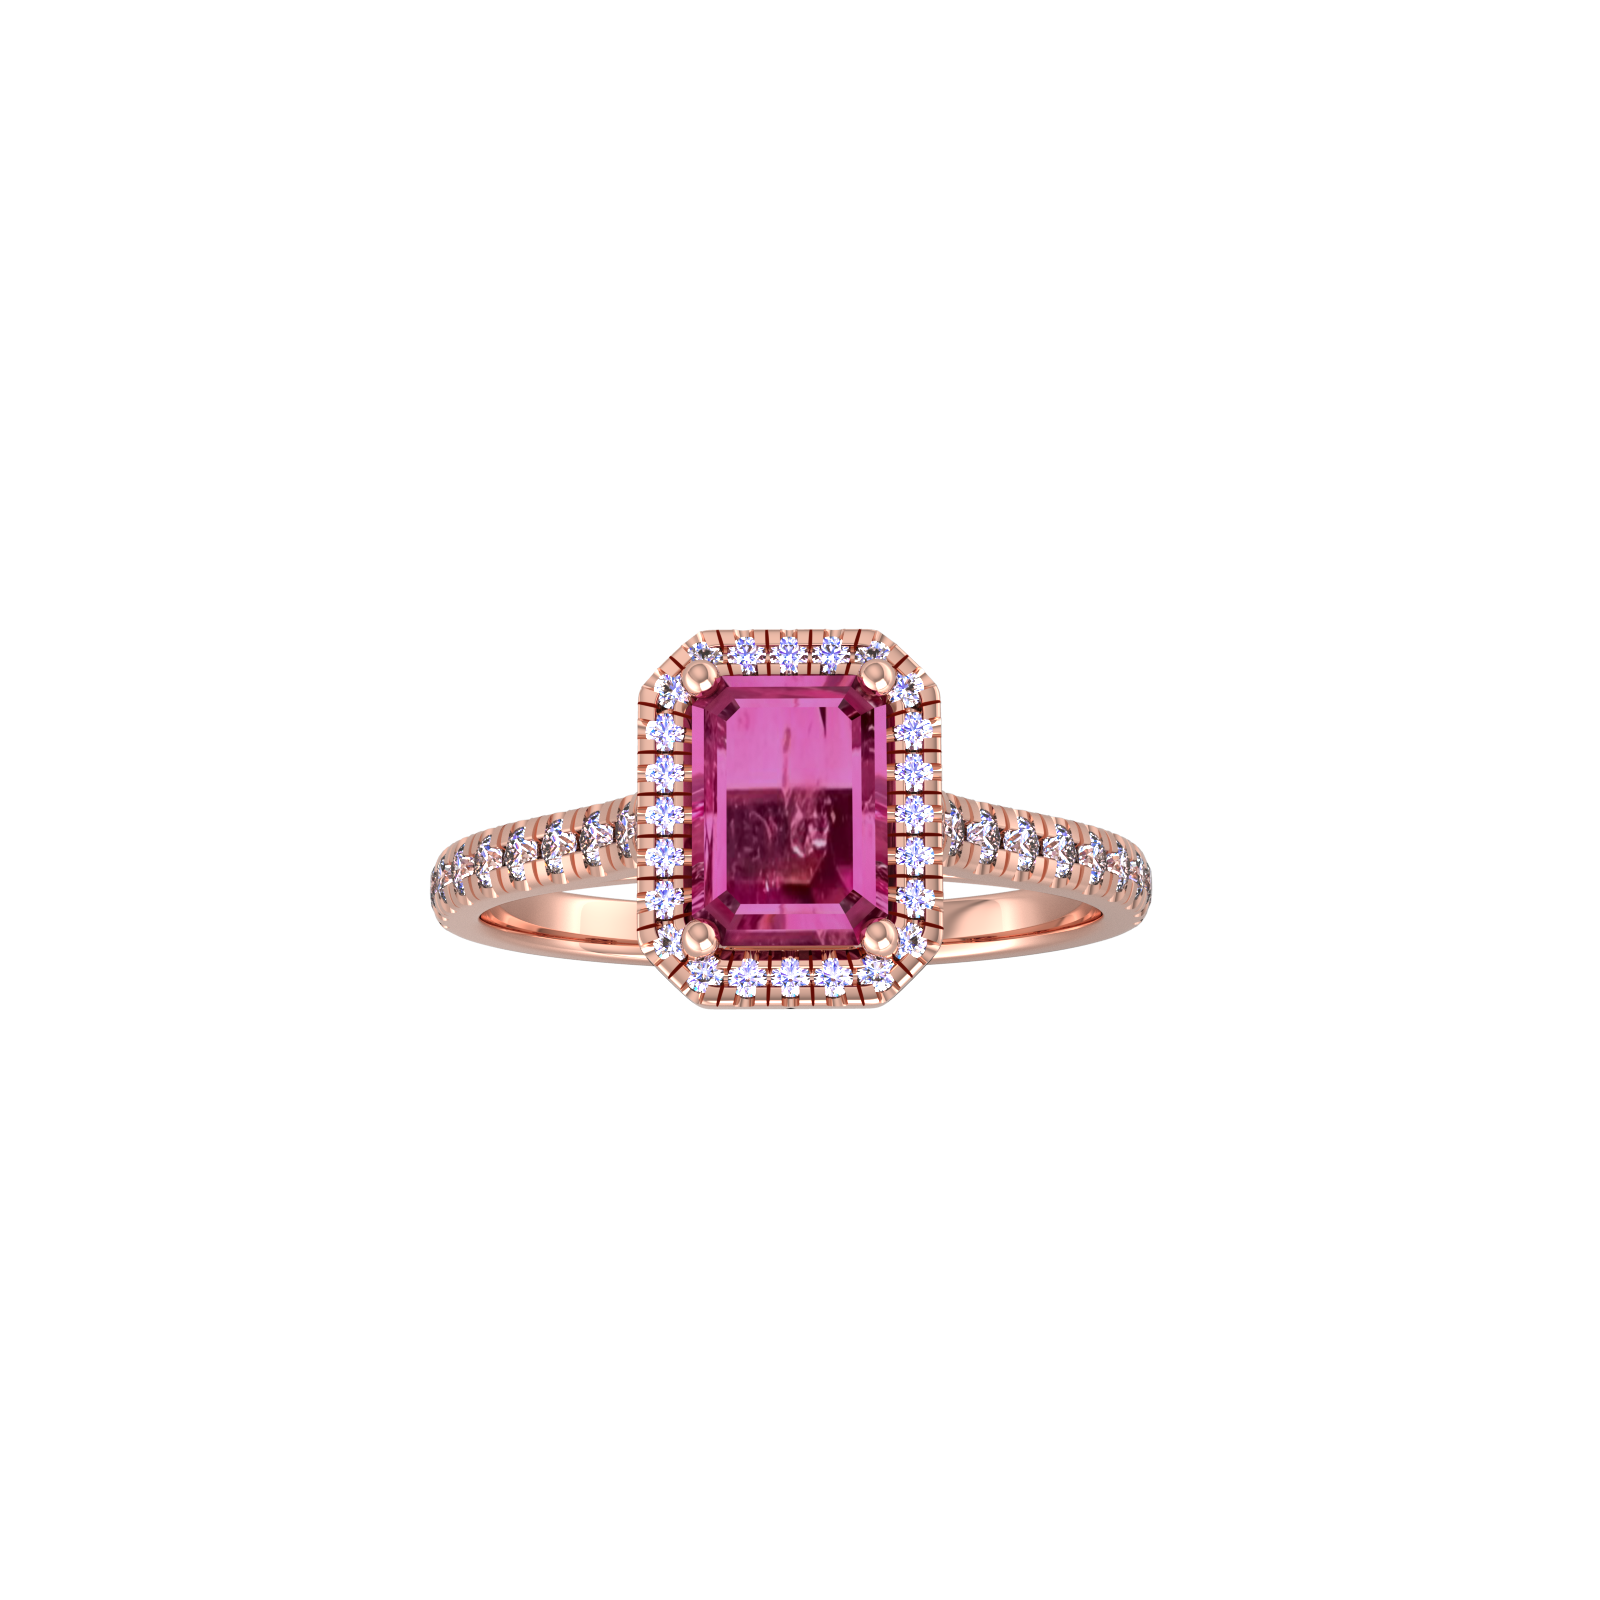 9ct Rose Gold Pink Tourmaline & Diamond Halo Ring with Diamond Shoulders - Ring Size Y.5